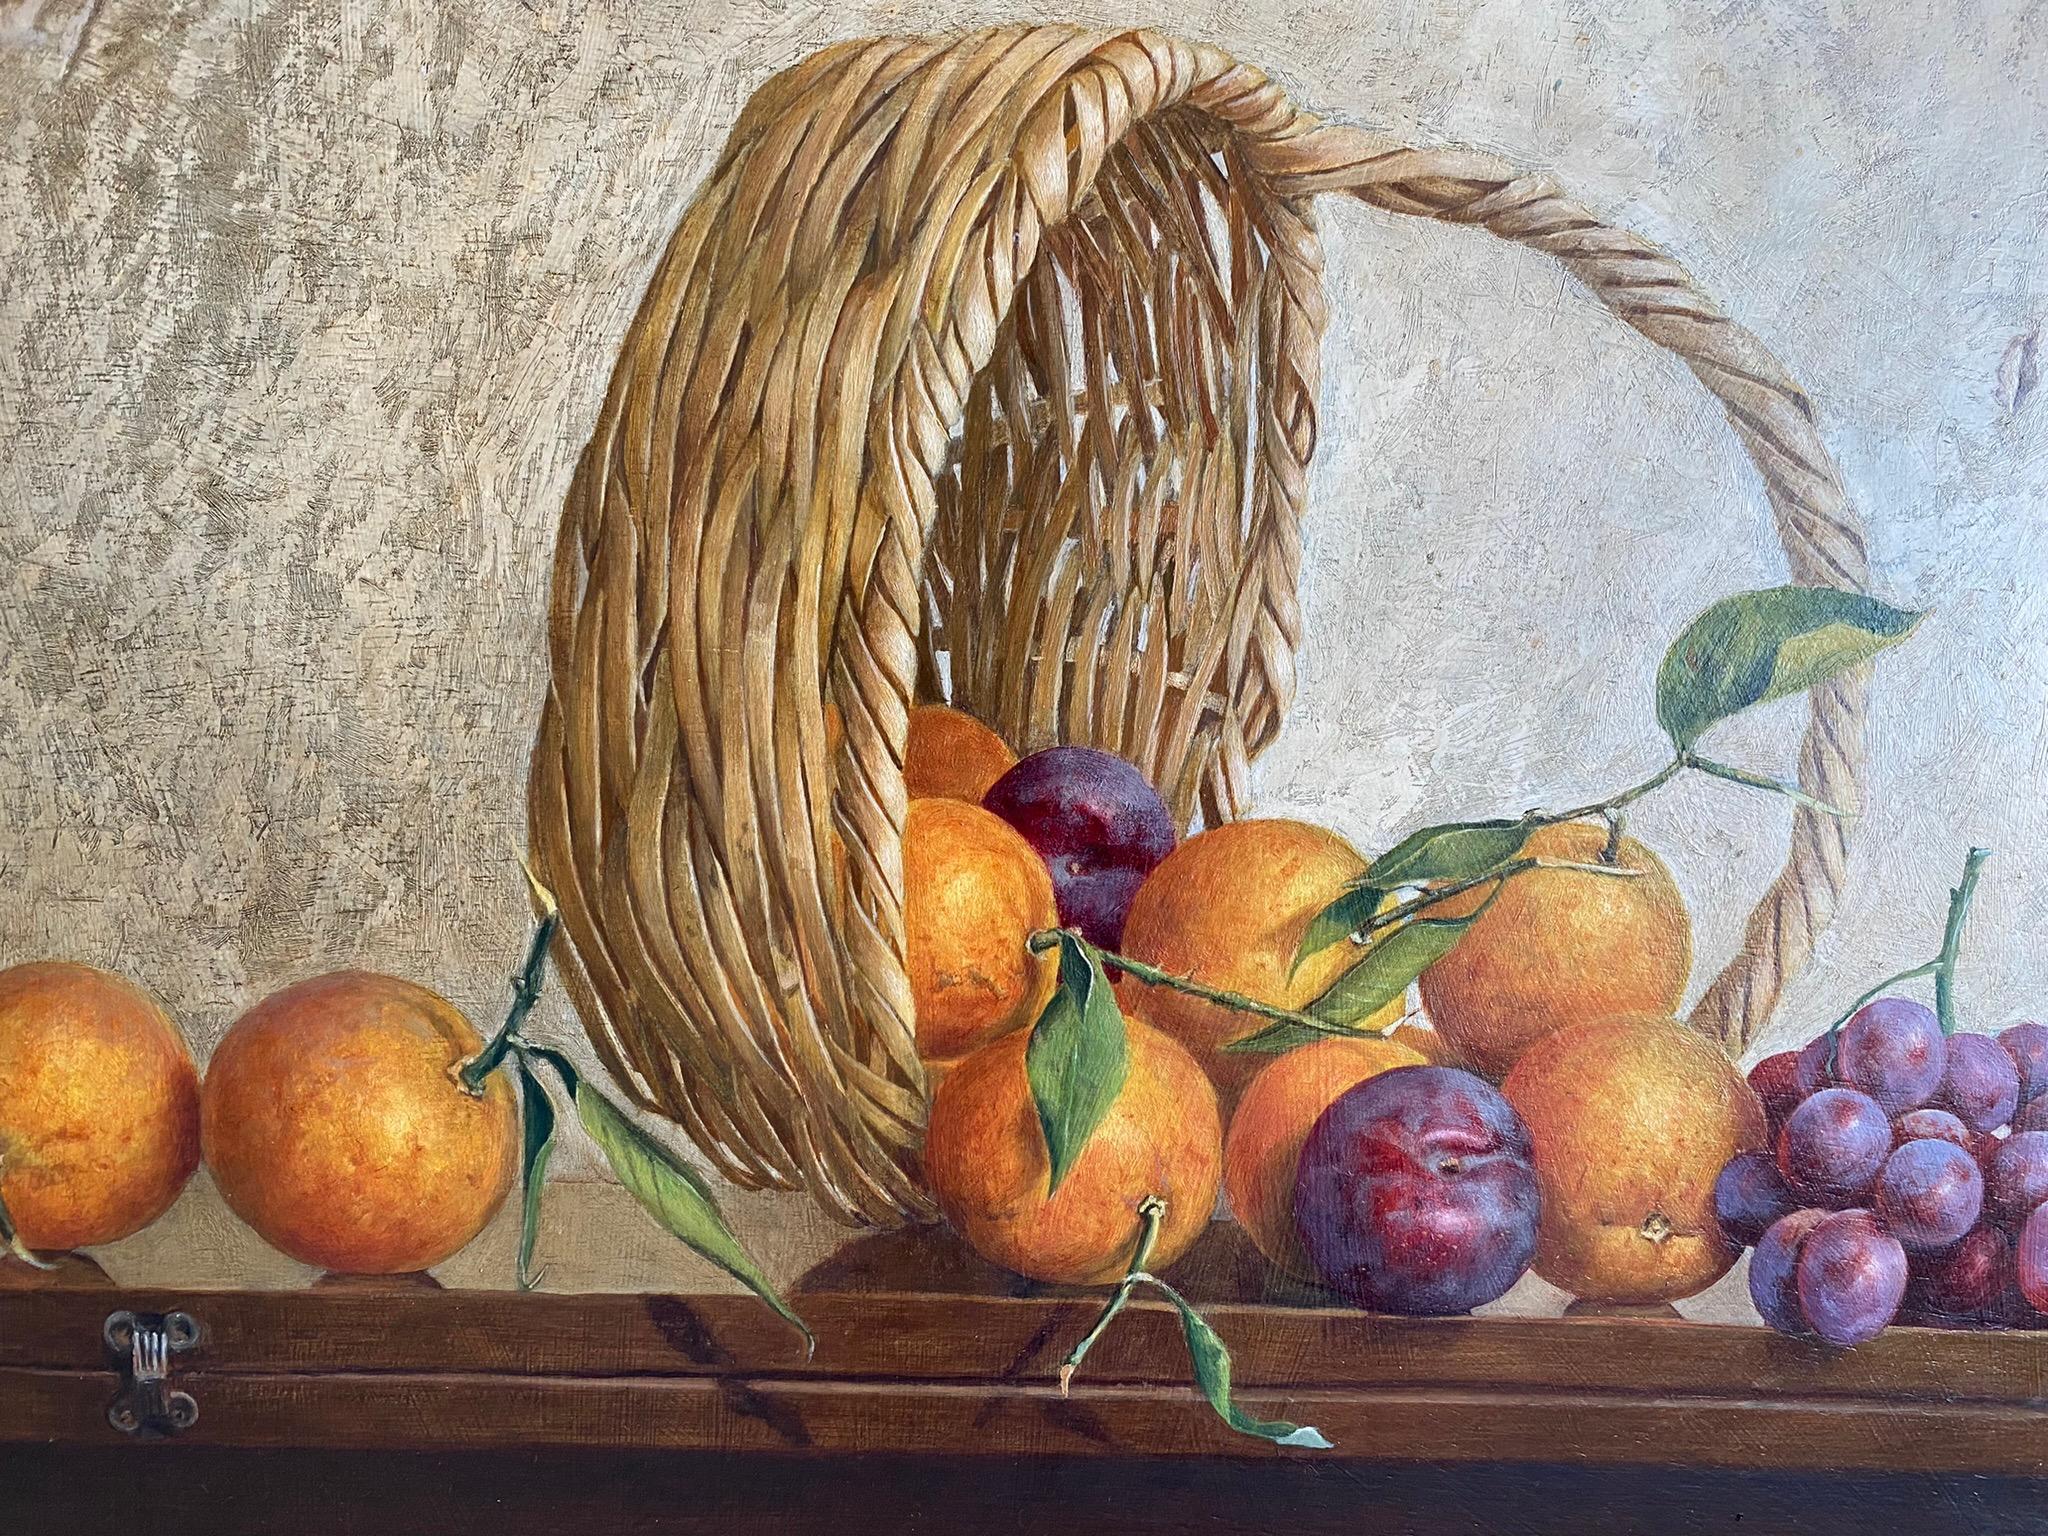 Still life with basket. Spanish Contemporary Figurative Realism. Oil on panel - Realist Painting by Ospina Ortiz